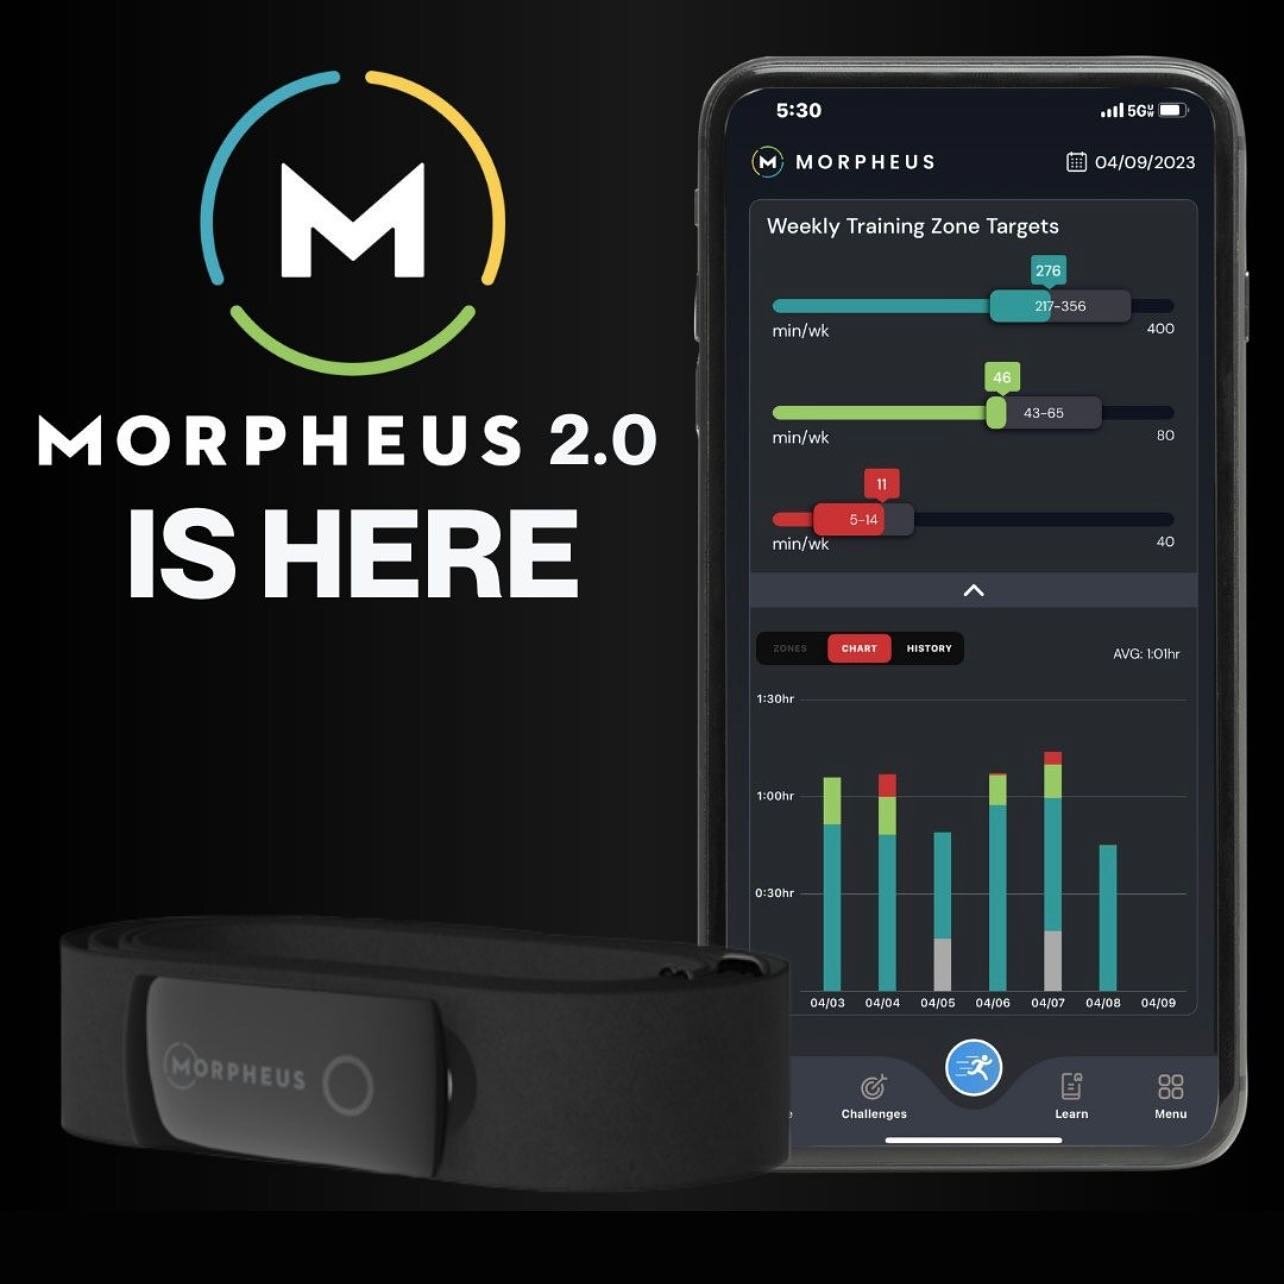 GET READY!! @trainwithmorpheus is officially LIVE at @evexiakc starting 11/20/23!! 

✅ Get in YOUR Zone. Every Day.
✅ Hit Your Weekly Training Targets
✅ Build Cardio with Zone-Based Intervals
✅ Track Your HRV. Optimize Your Recovery

Morpheus revolut